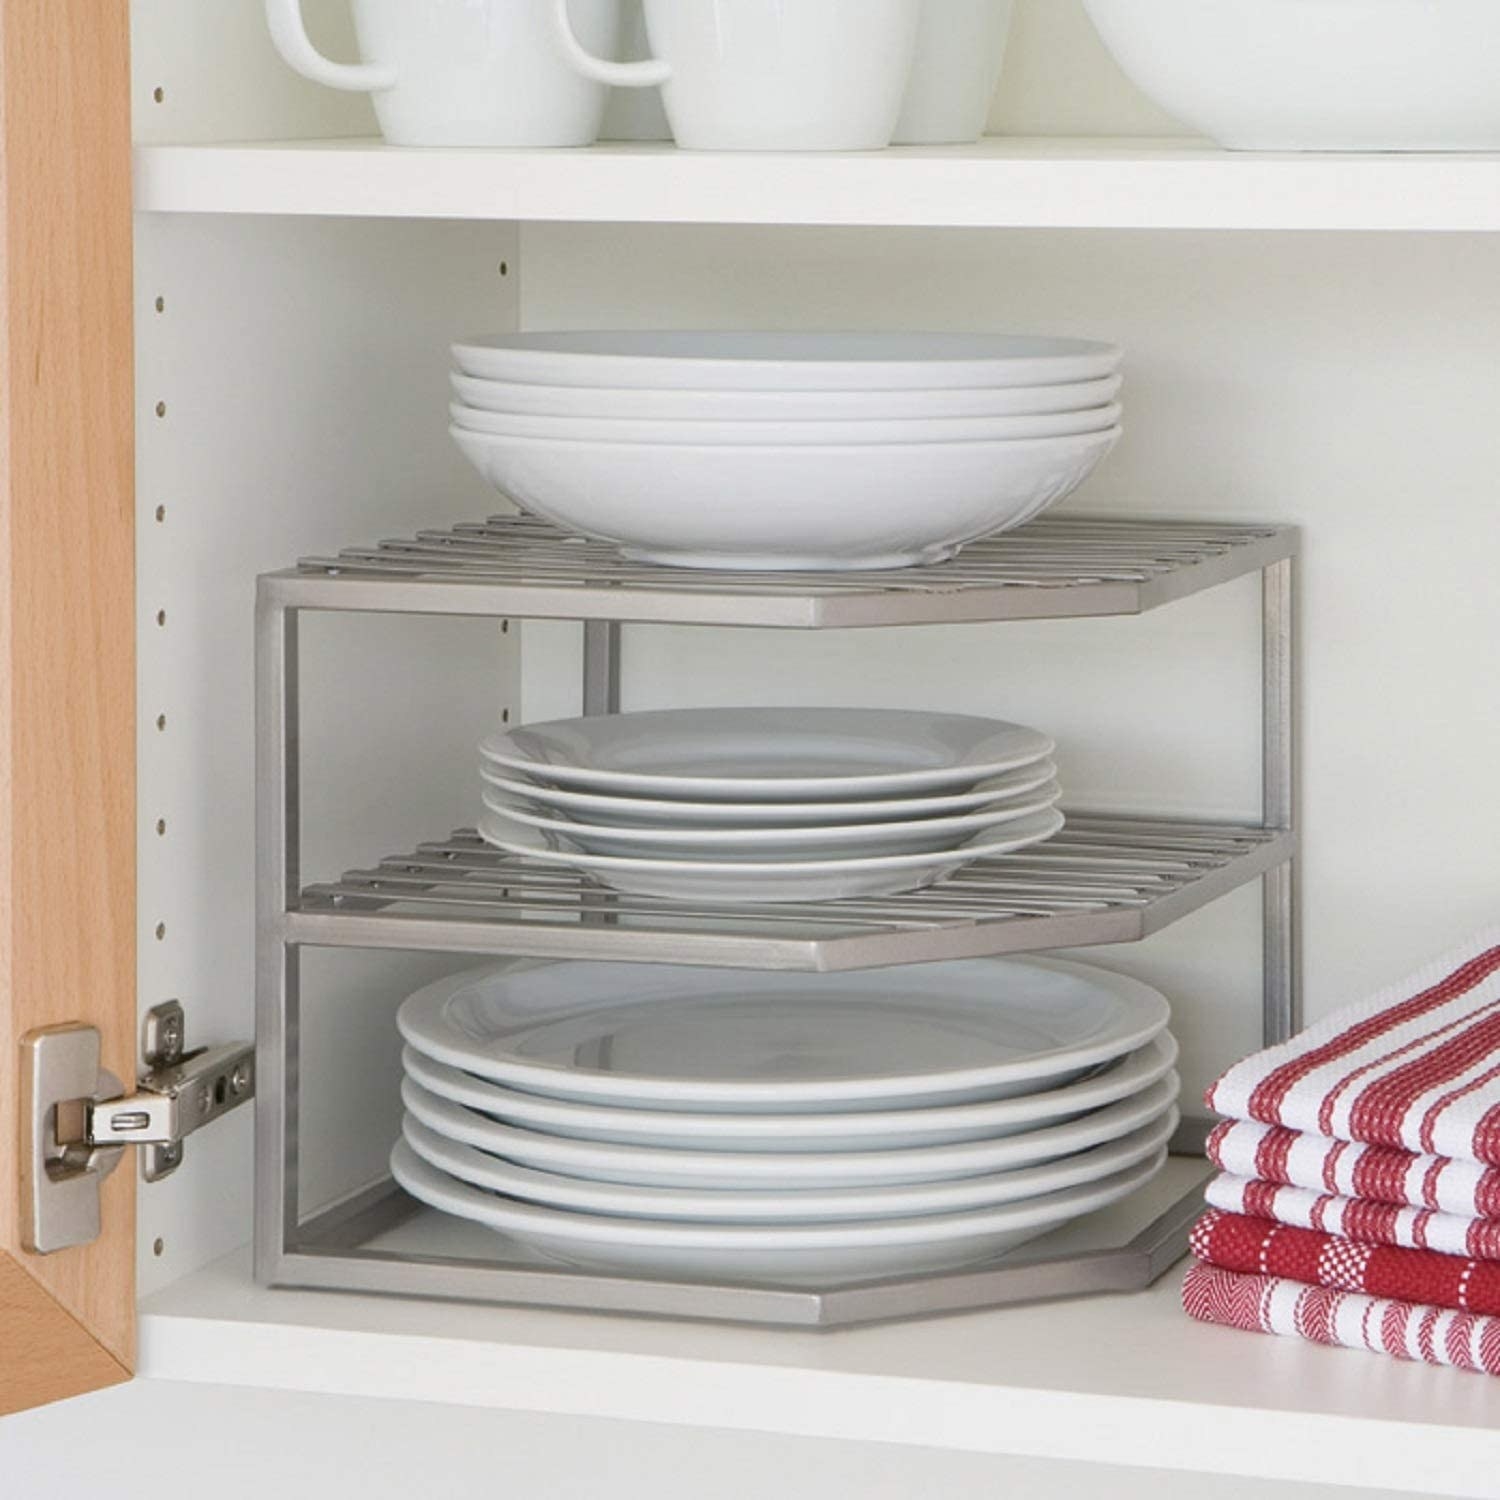 A platinum corner dish and bowl organizer with wire-framed shelves